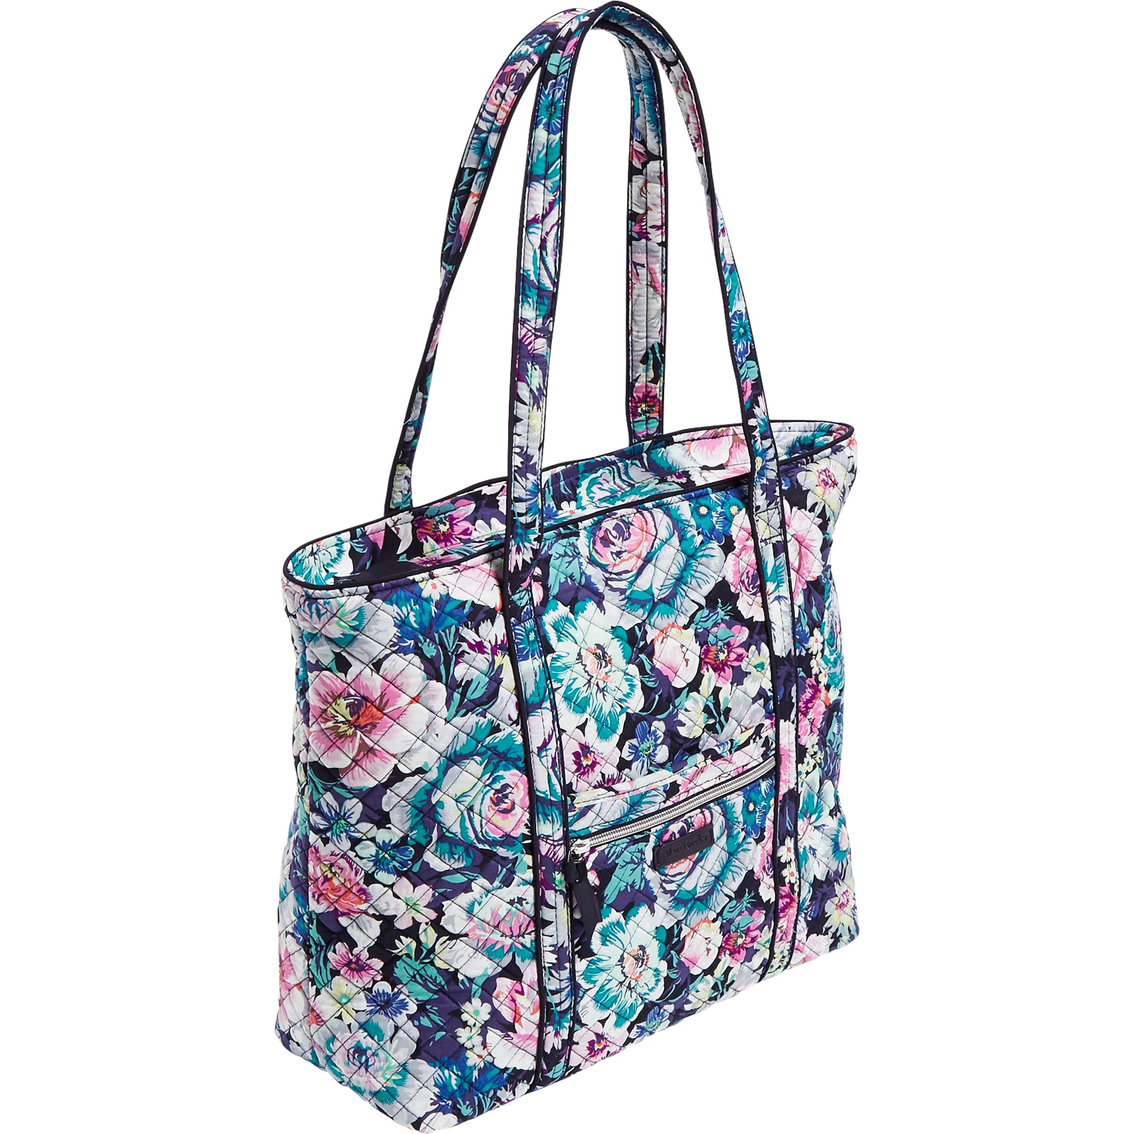 Vera Bradley Garden Grove Tote Large | Totes & Shoppers | Clothing ...